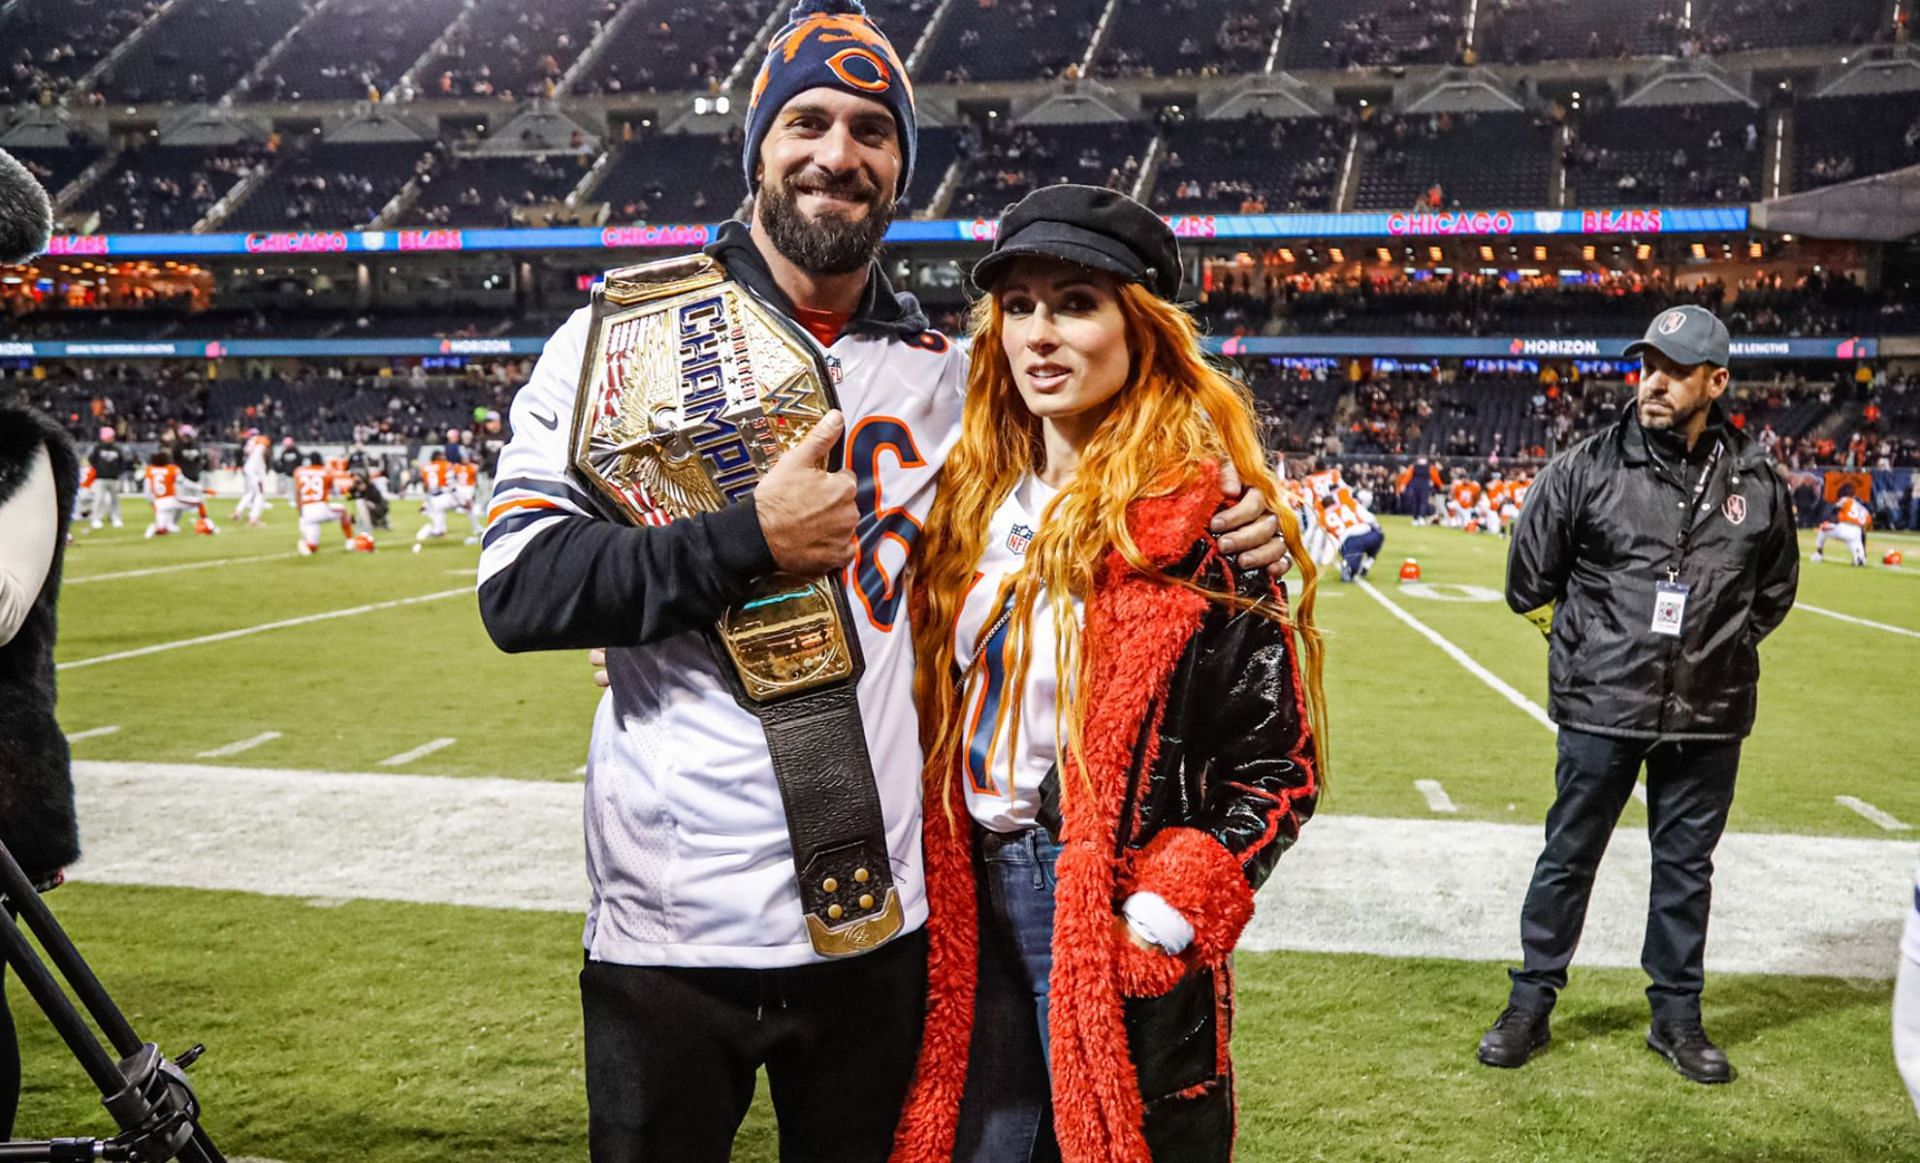 Becky Lynch and Seth Rollins Grace the WWE Universe With Their Drip -  EssentiallySports